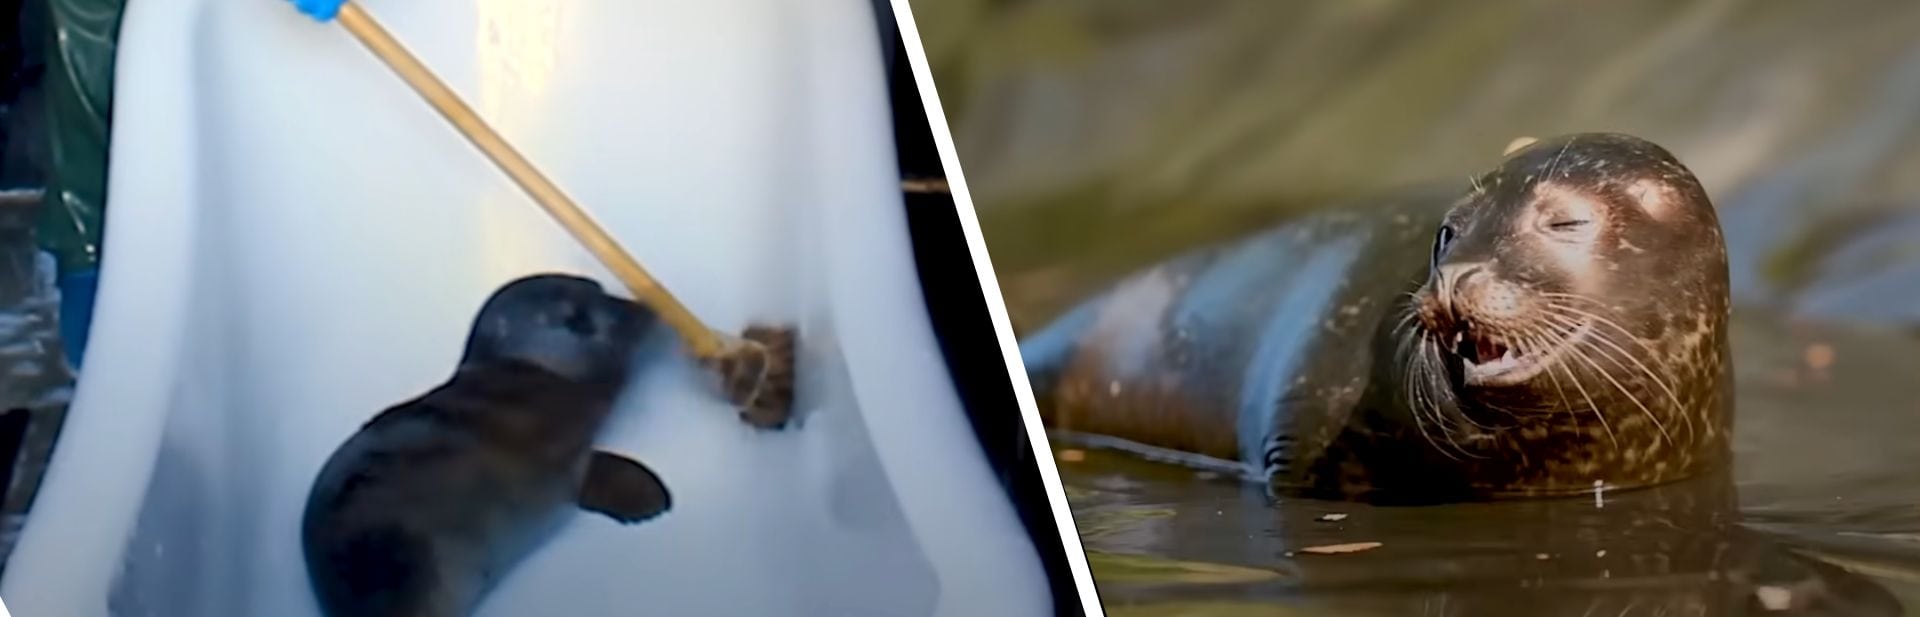 Adorable Baby Seal’s Journey from Bathtub to Ocean Life